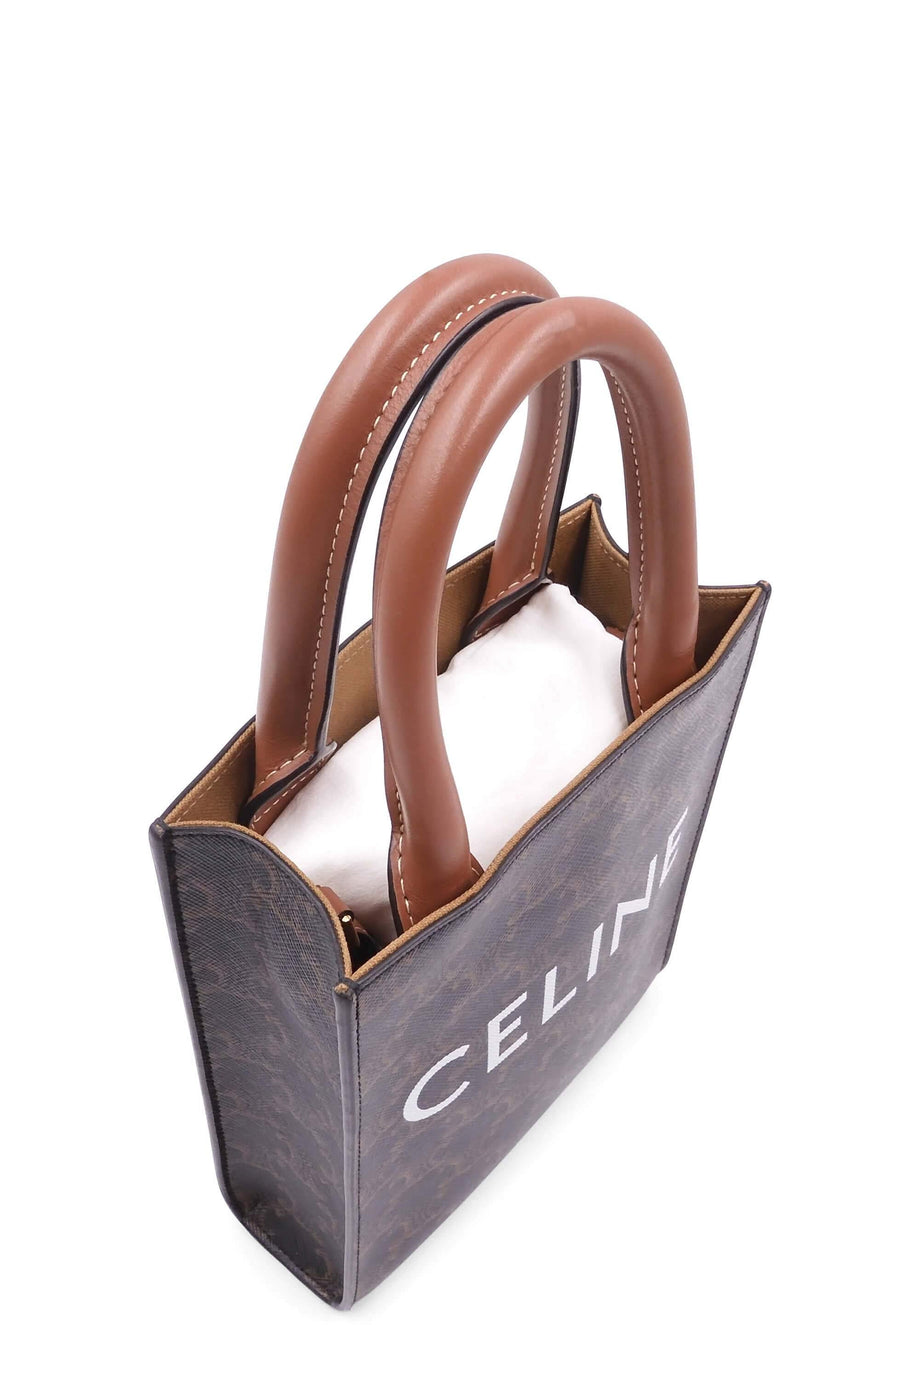 Céline Pre-Owned 2019 Small Triomphe Vertical Cabas Tote Bag - Farfetch